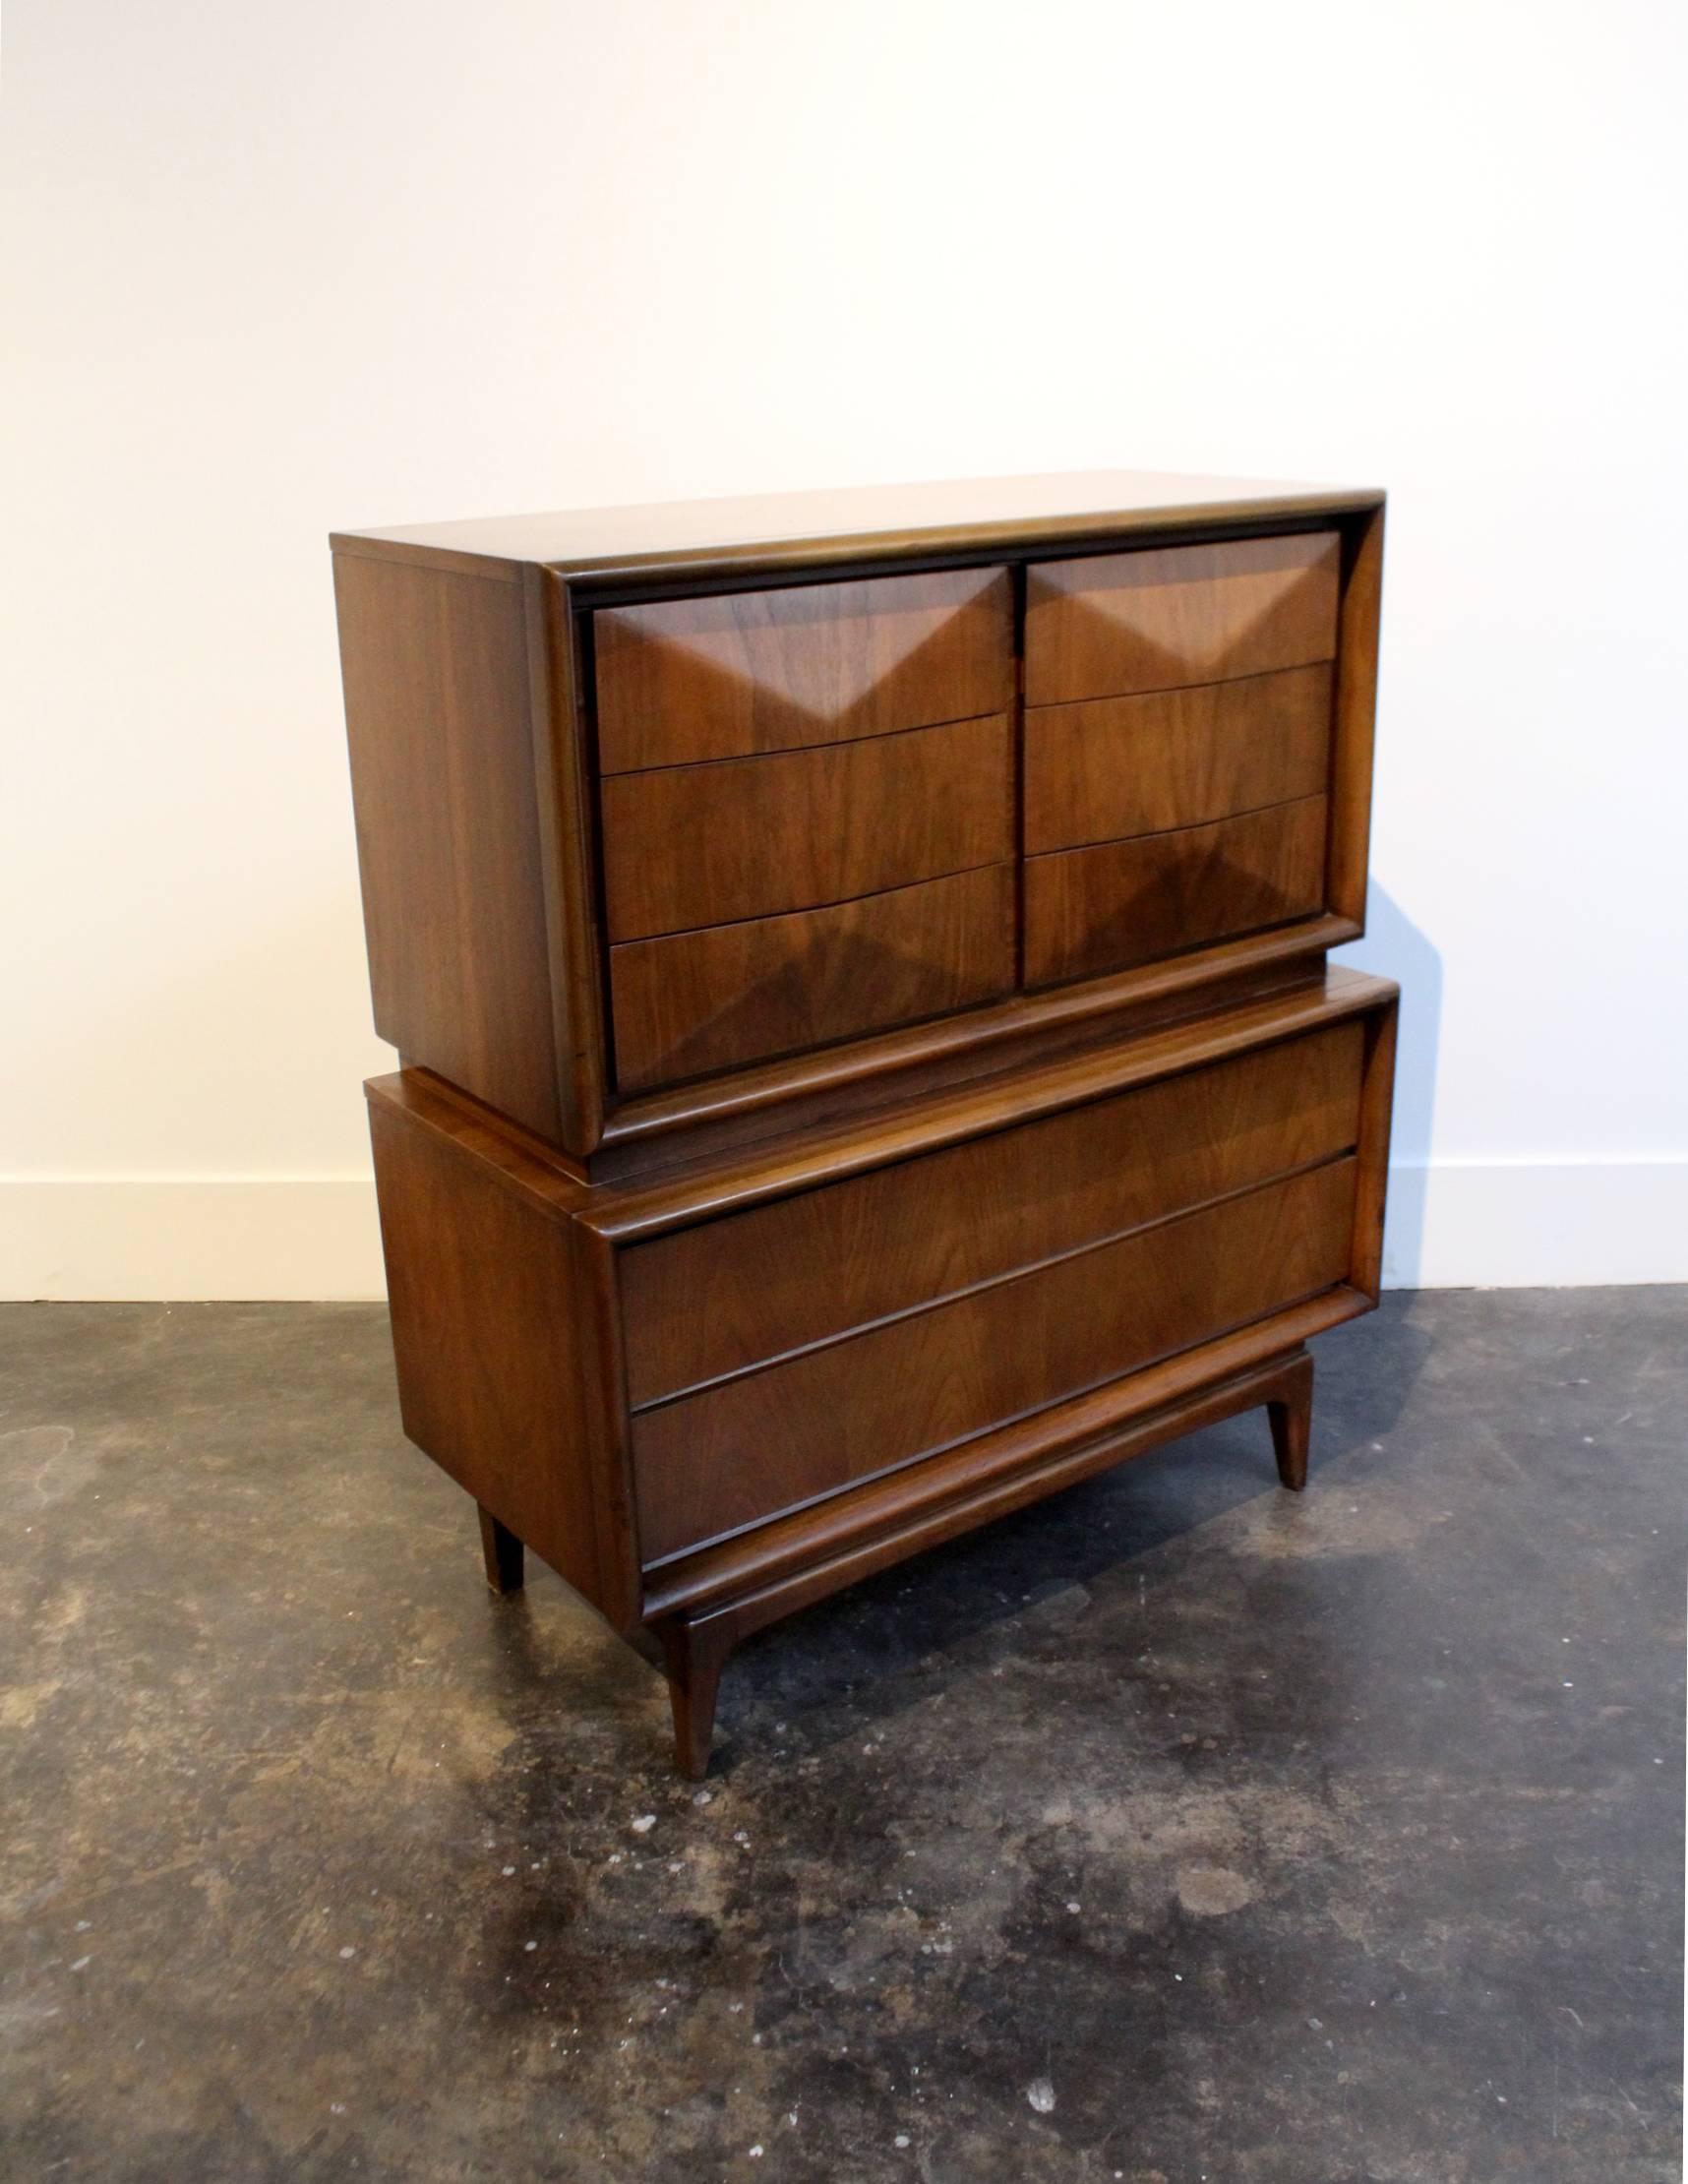 One of the most iconic designs of the era! Beautiful beveled, diamond-shaped front with 6 deep drawers on top and two huge drawers on the bottom, glowing walnut wood, tapered feet.. Good condition: light wear with some larger nicks (see pictures). I